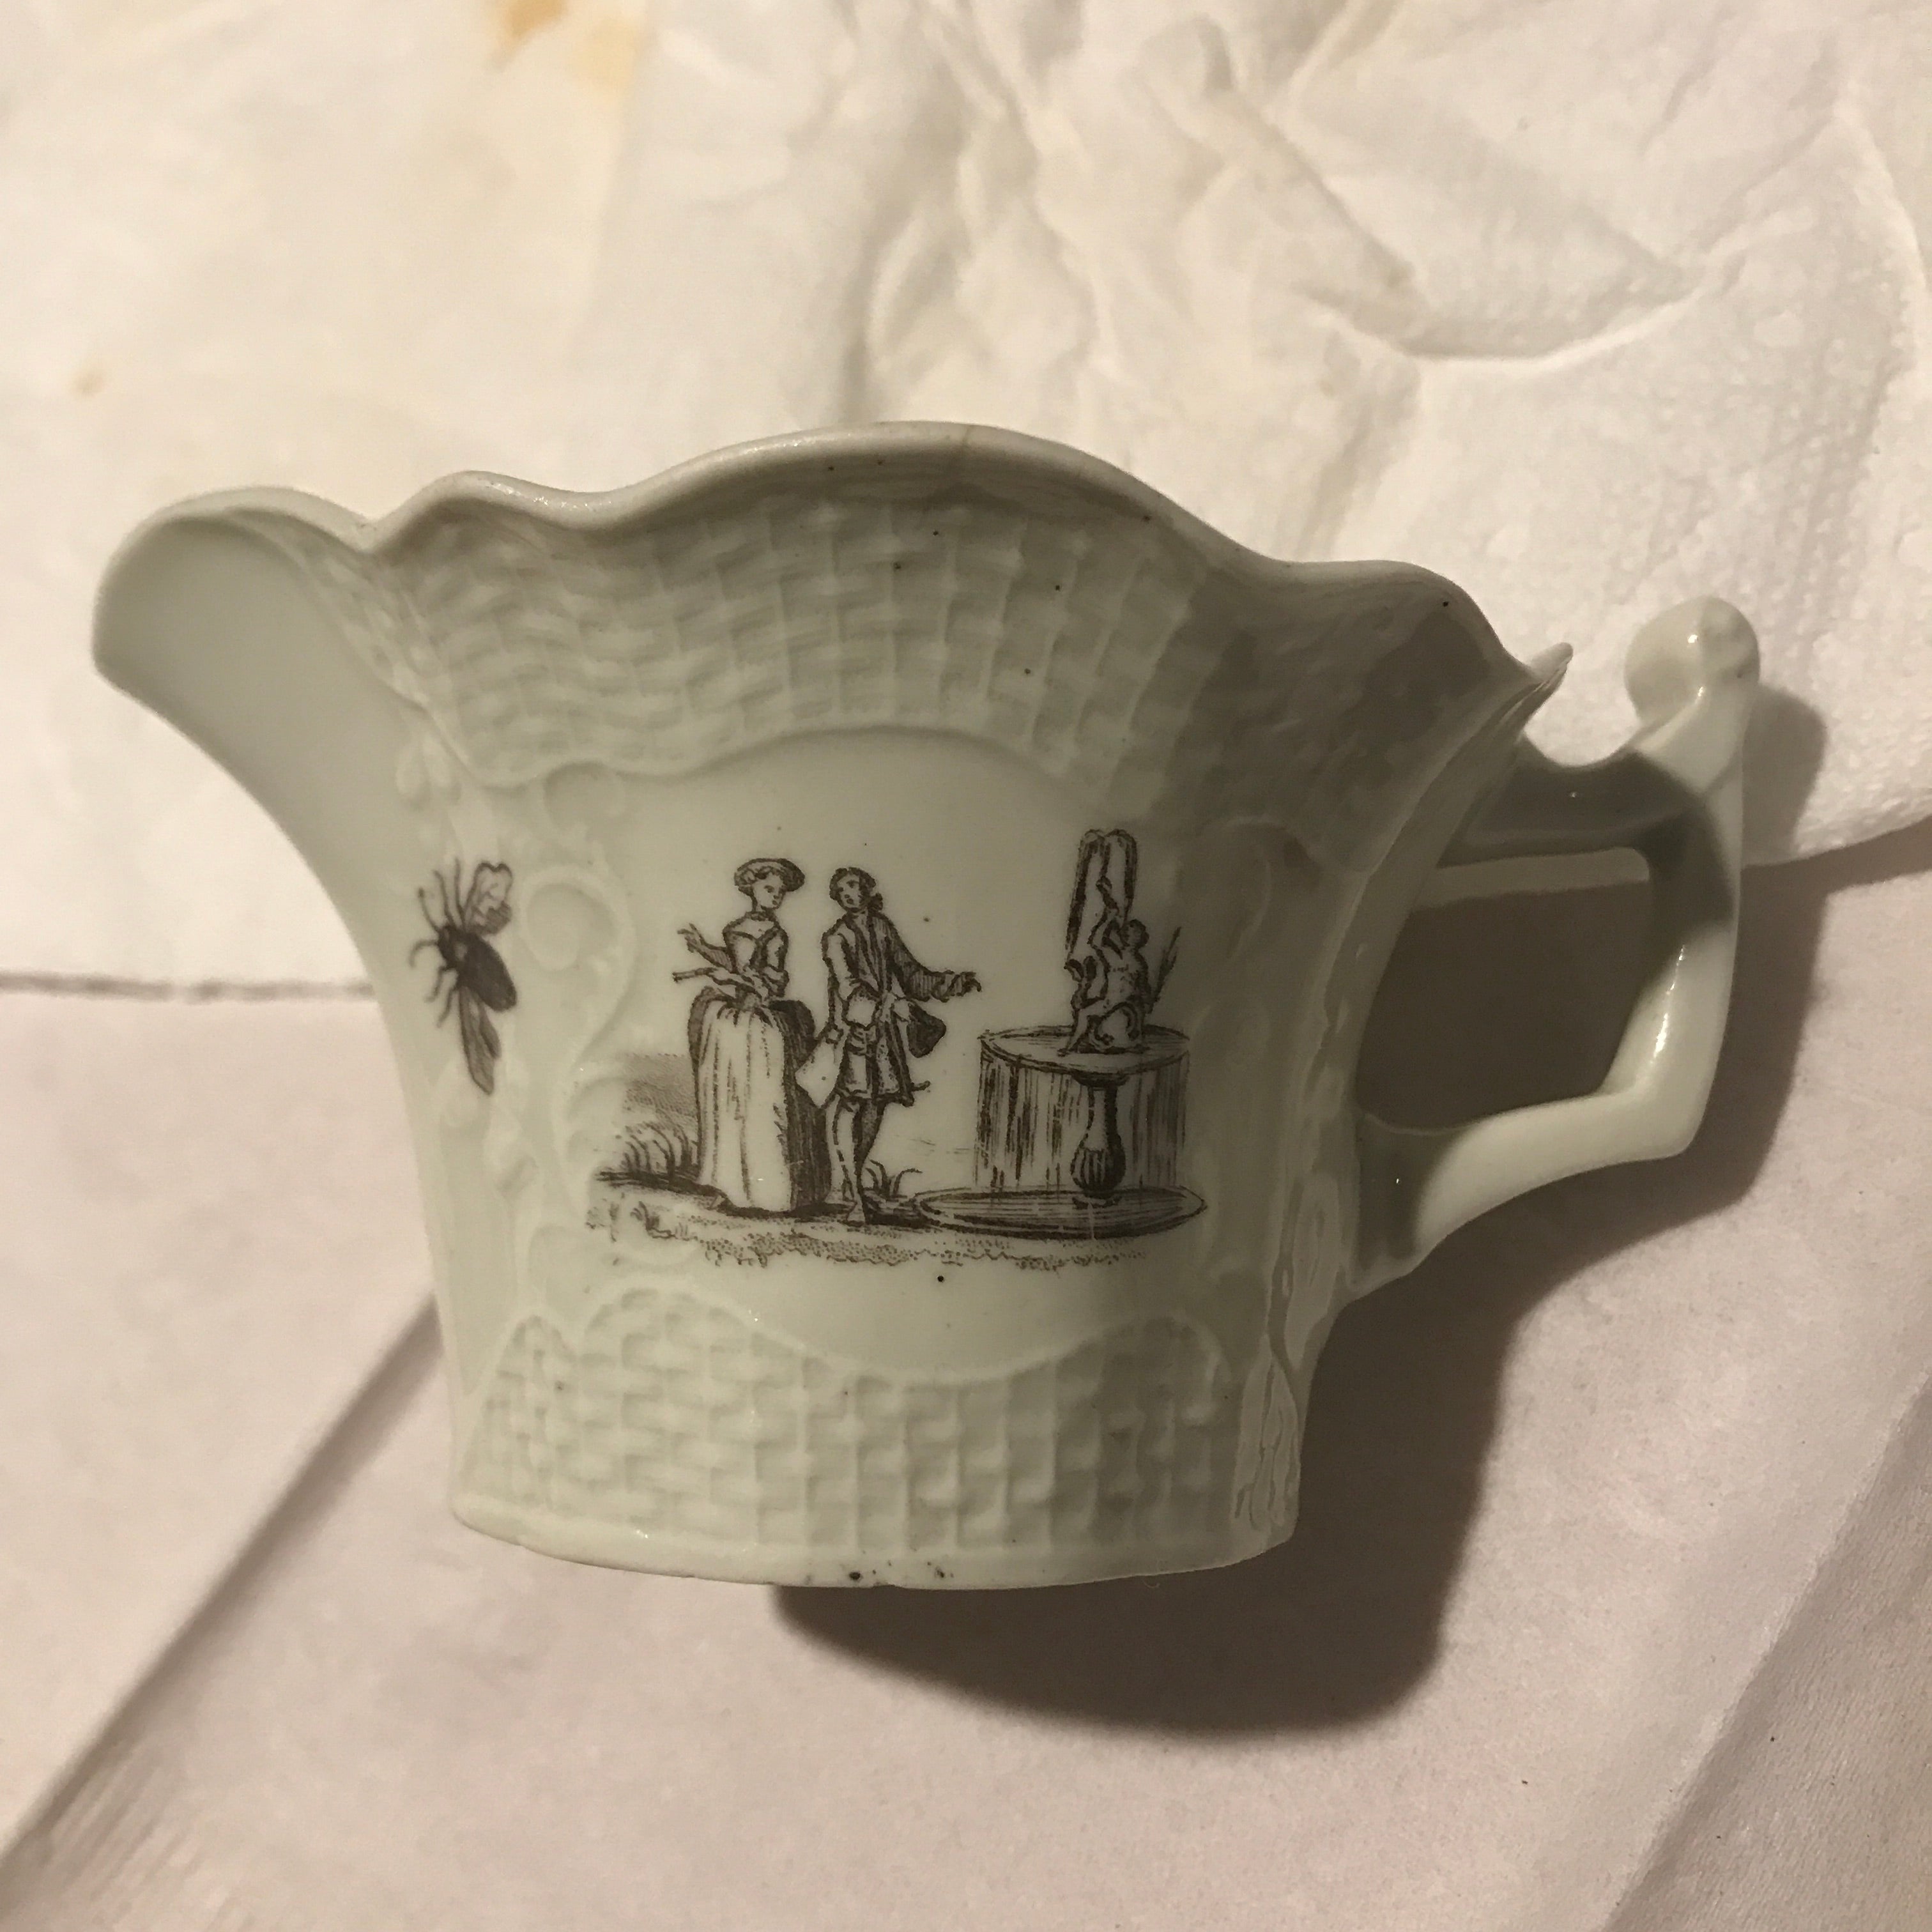 Rare 18th Century Worcester Porcelain Creamboat with Black Transfer Print